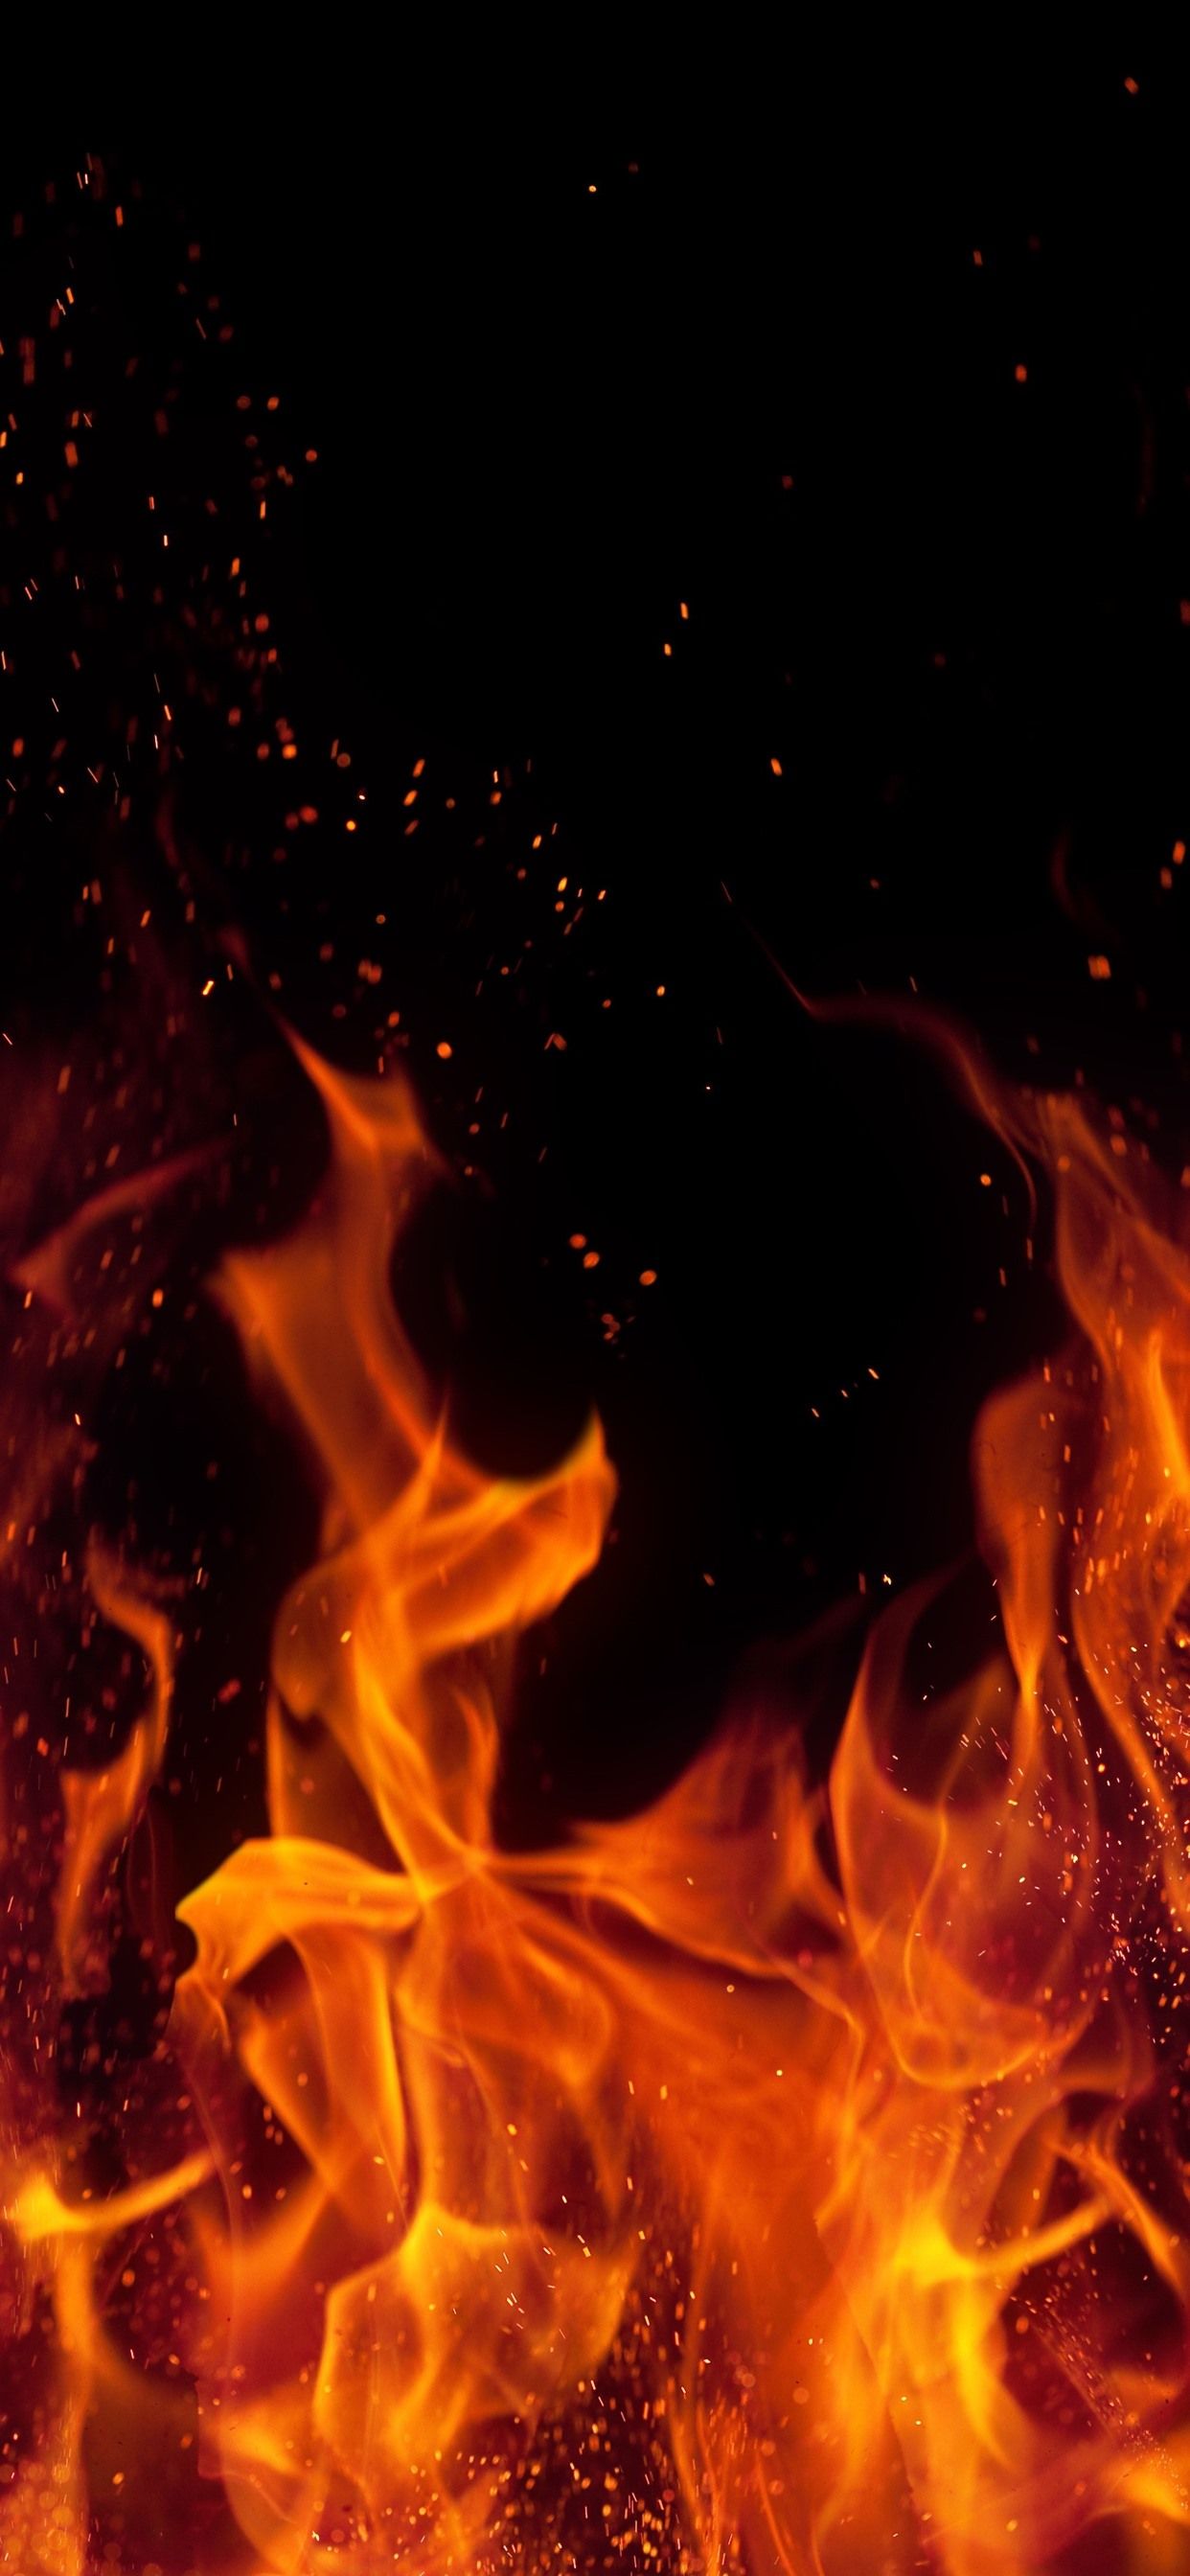 Fire, Flame, Sparks, Black Background 1242x2688 IPhone 11 Pro XS